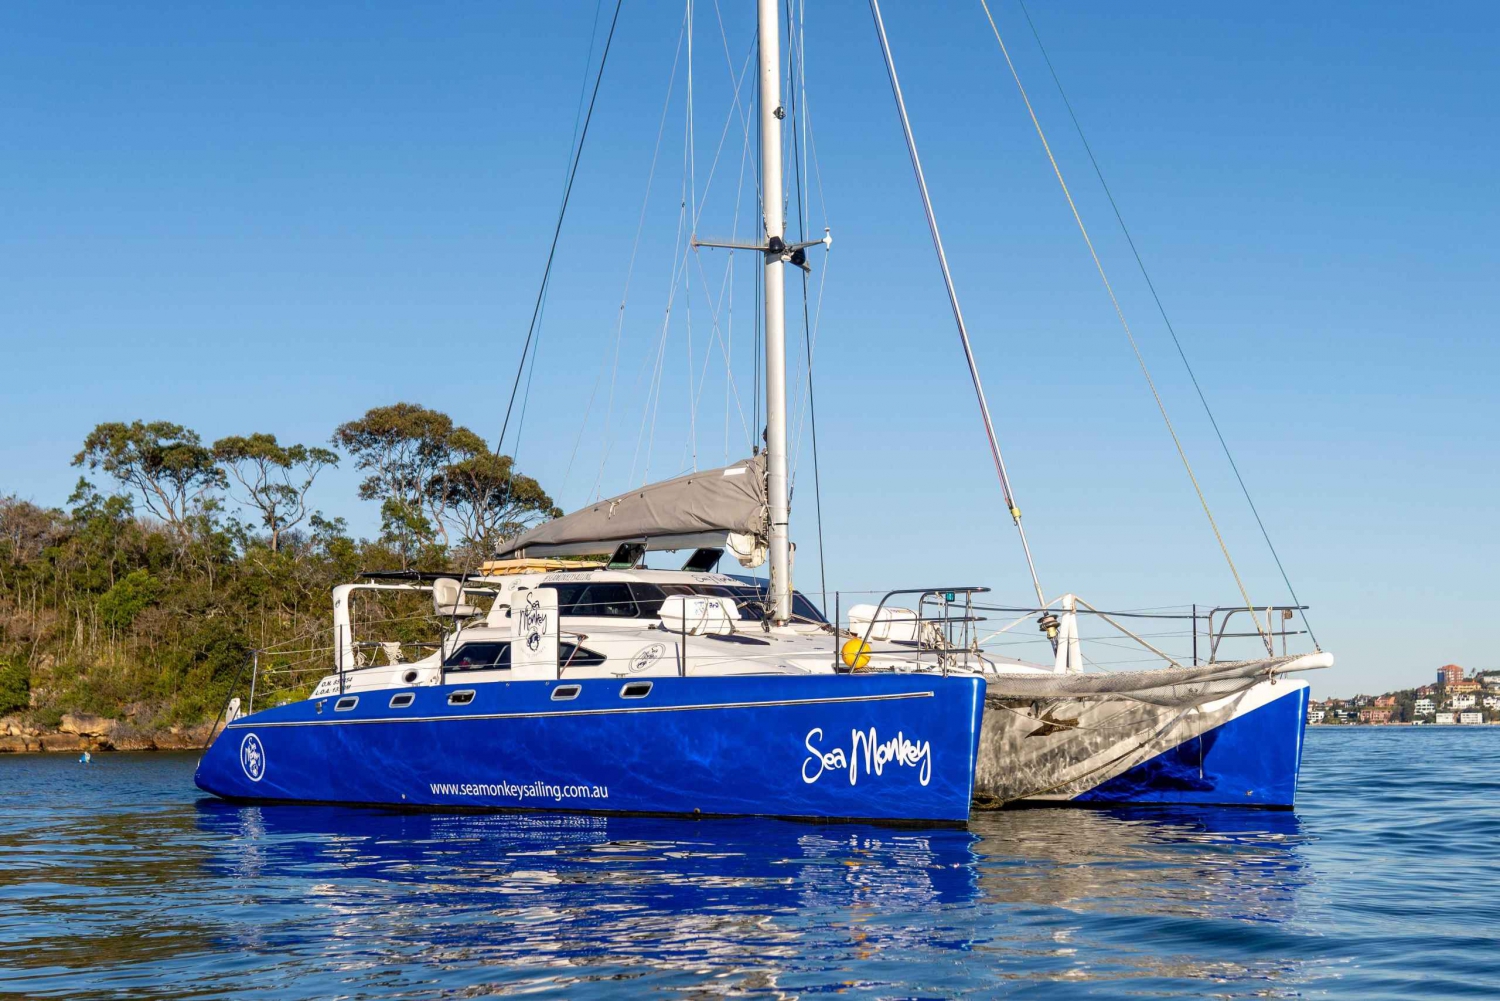 Sydney: Sails and Whales Private Catamaran Cruise